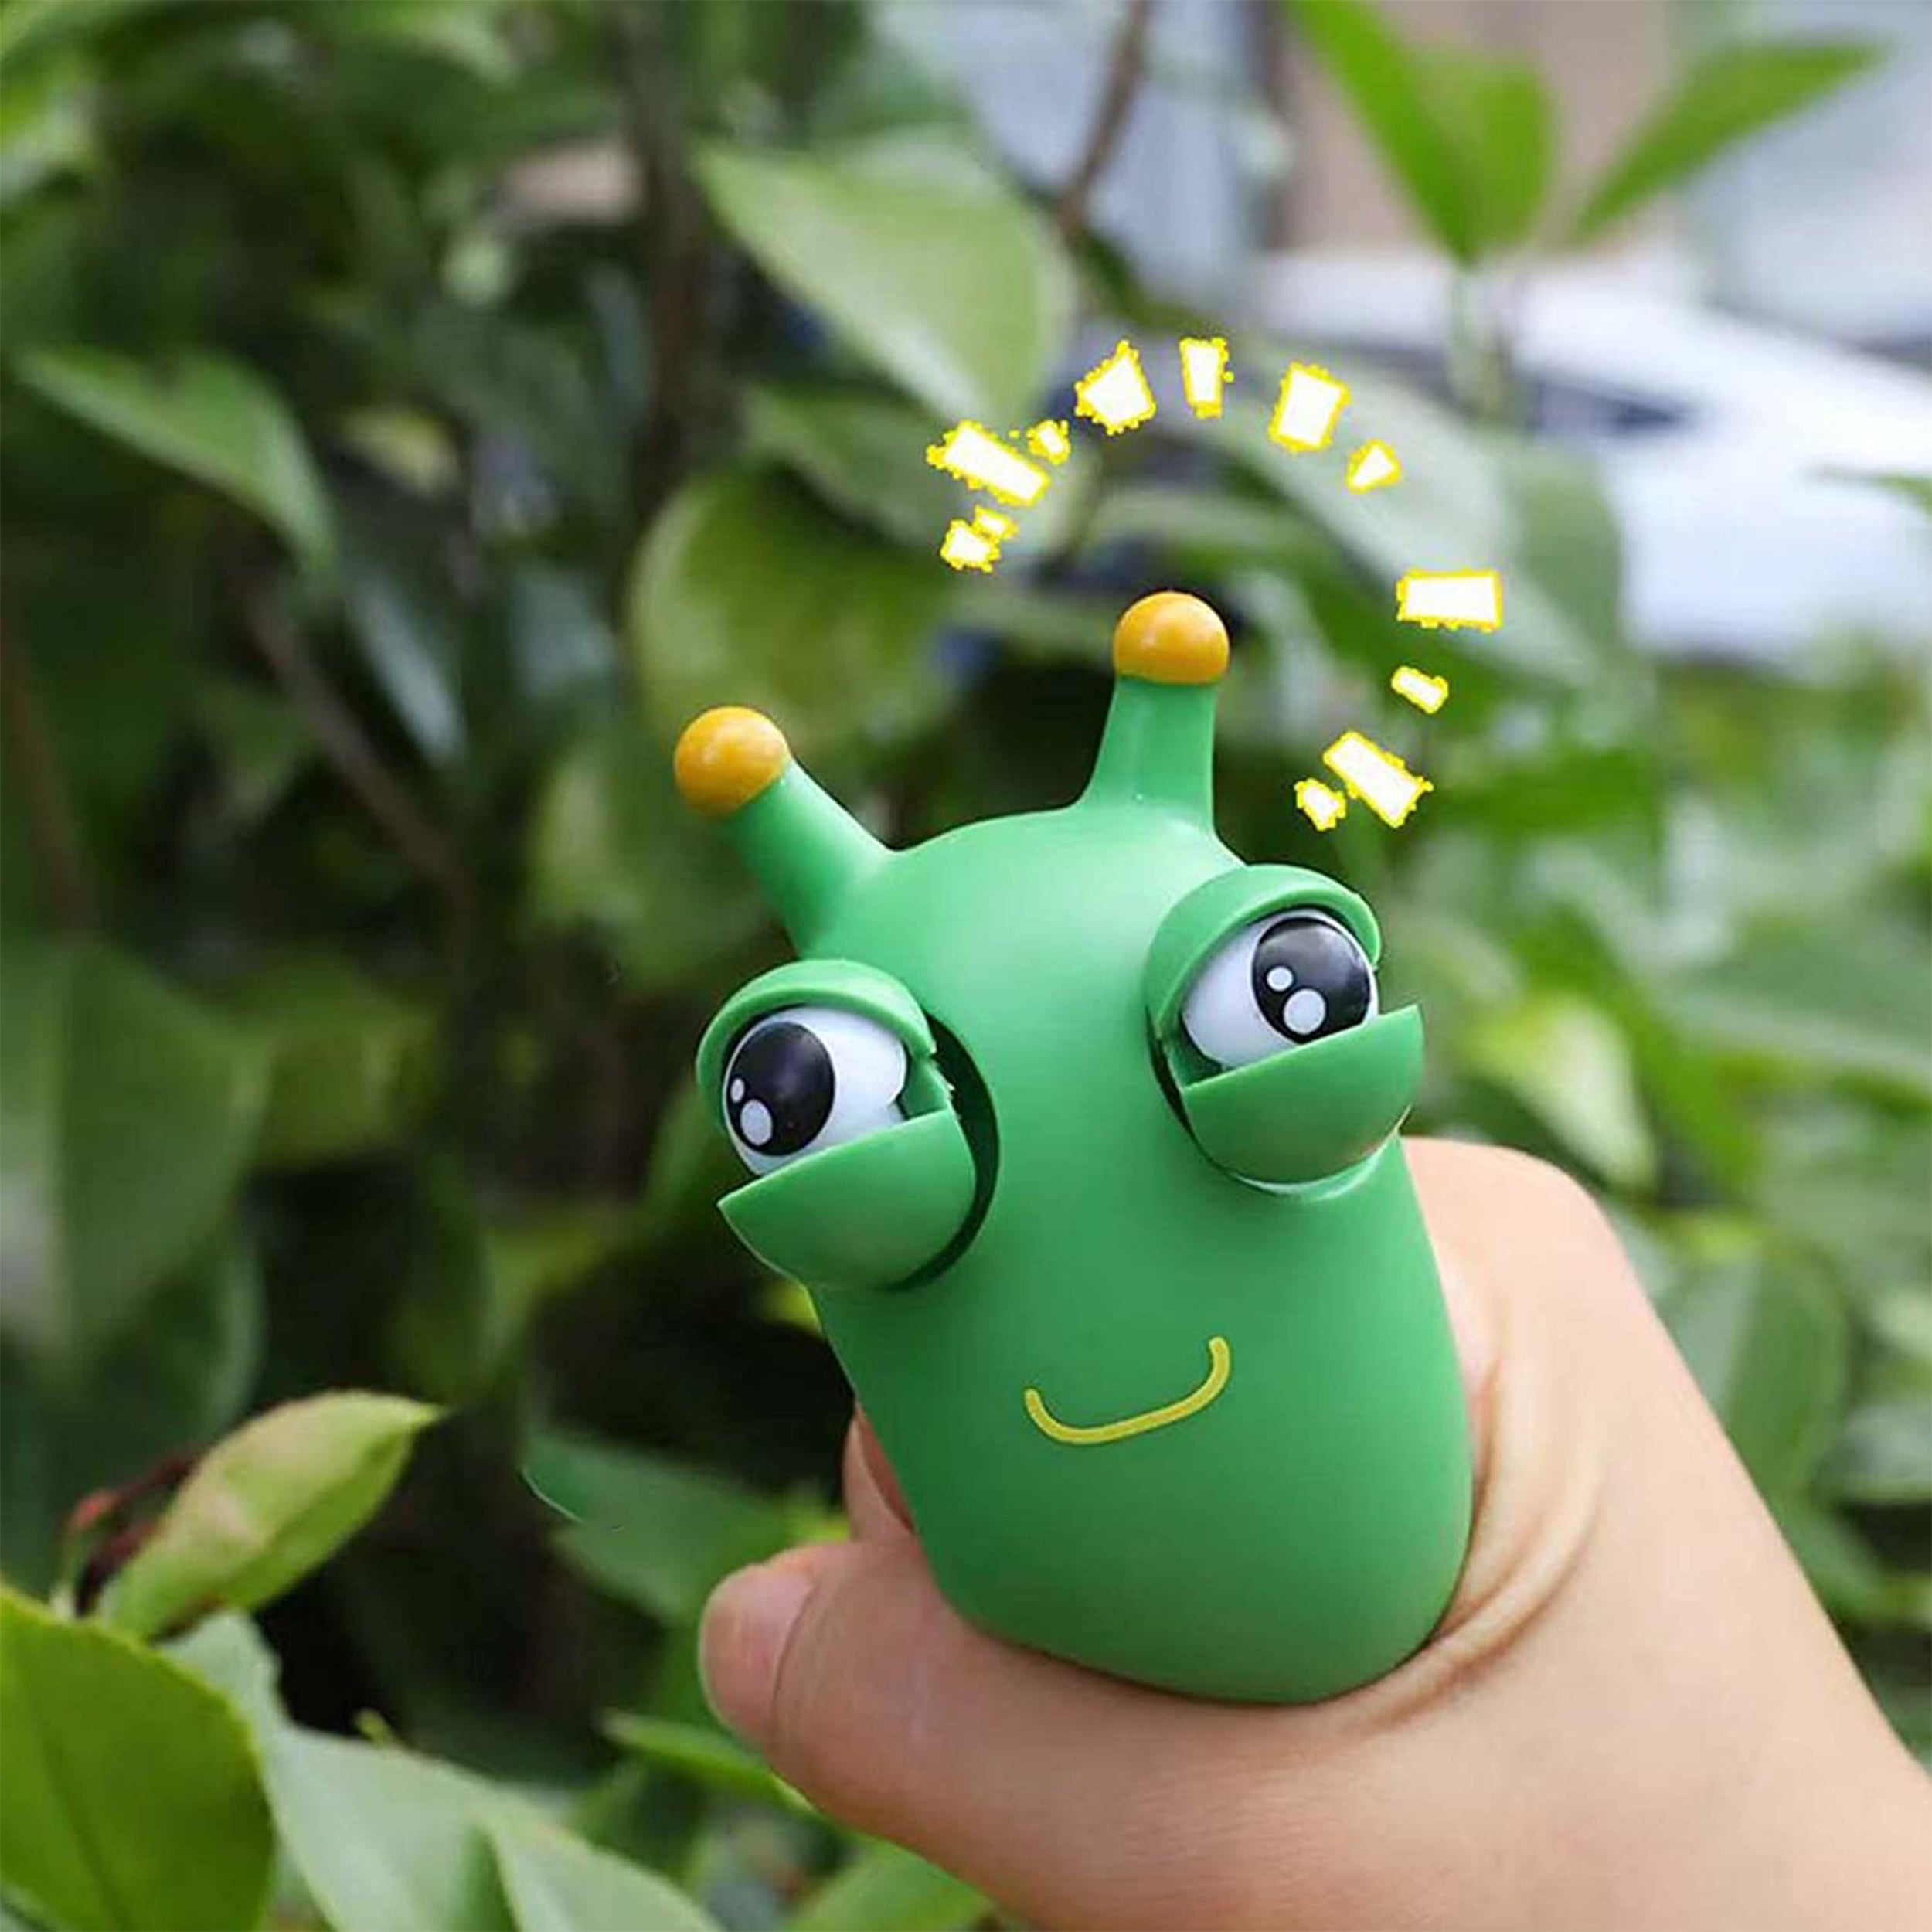 Eyeball Popping Squeeze Toy for Stress Relief and Office Desk Toys